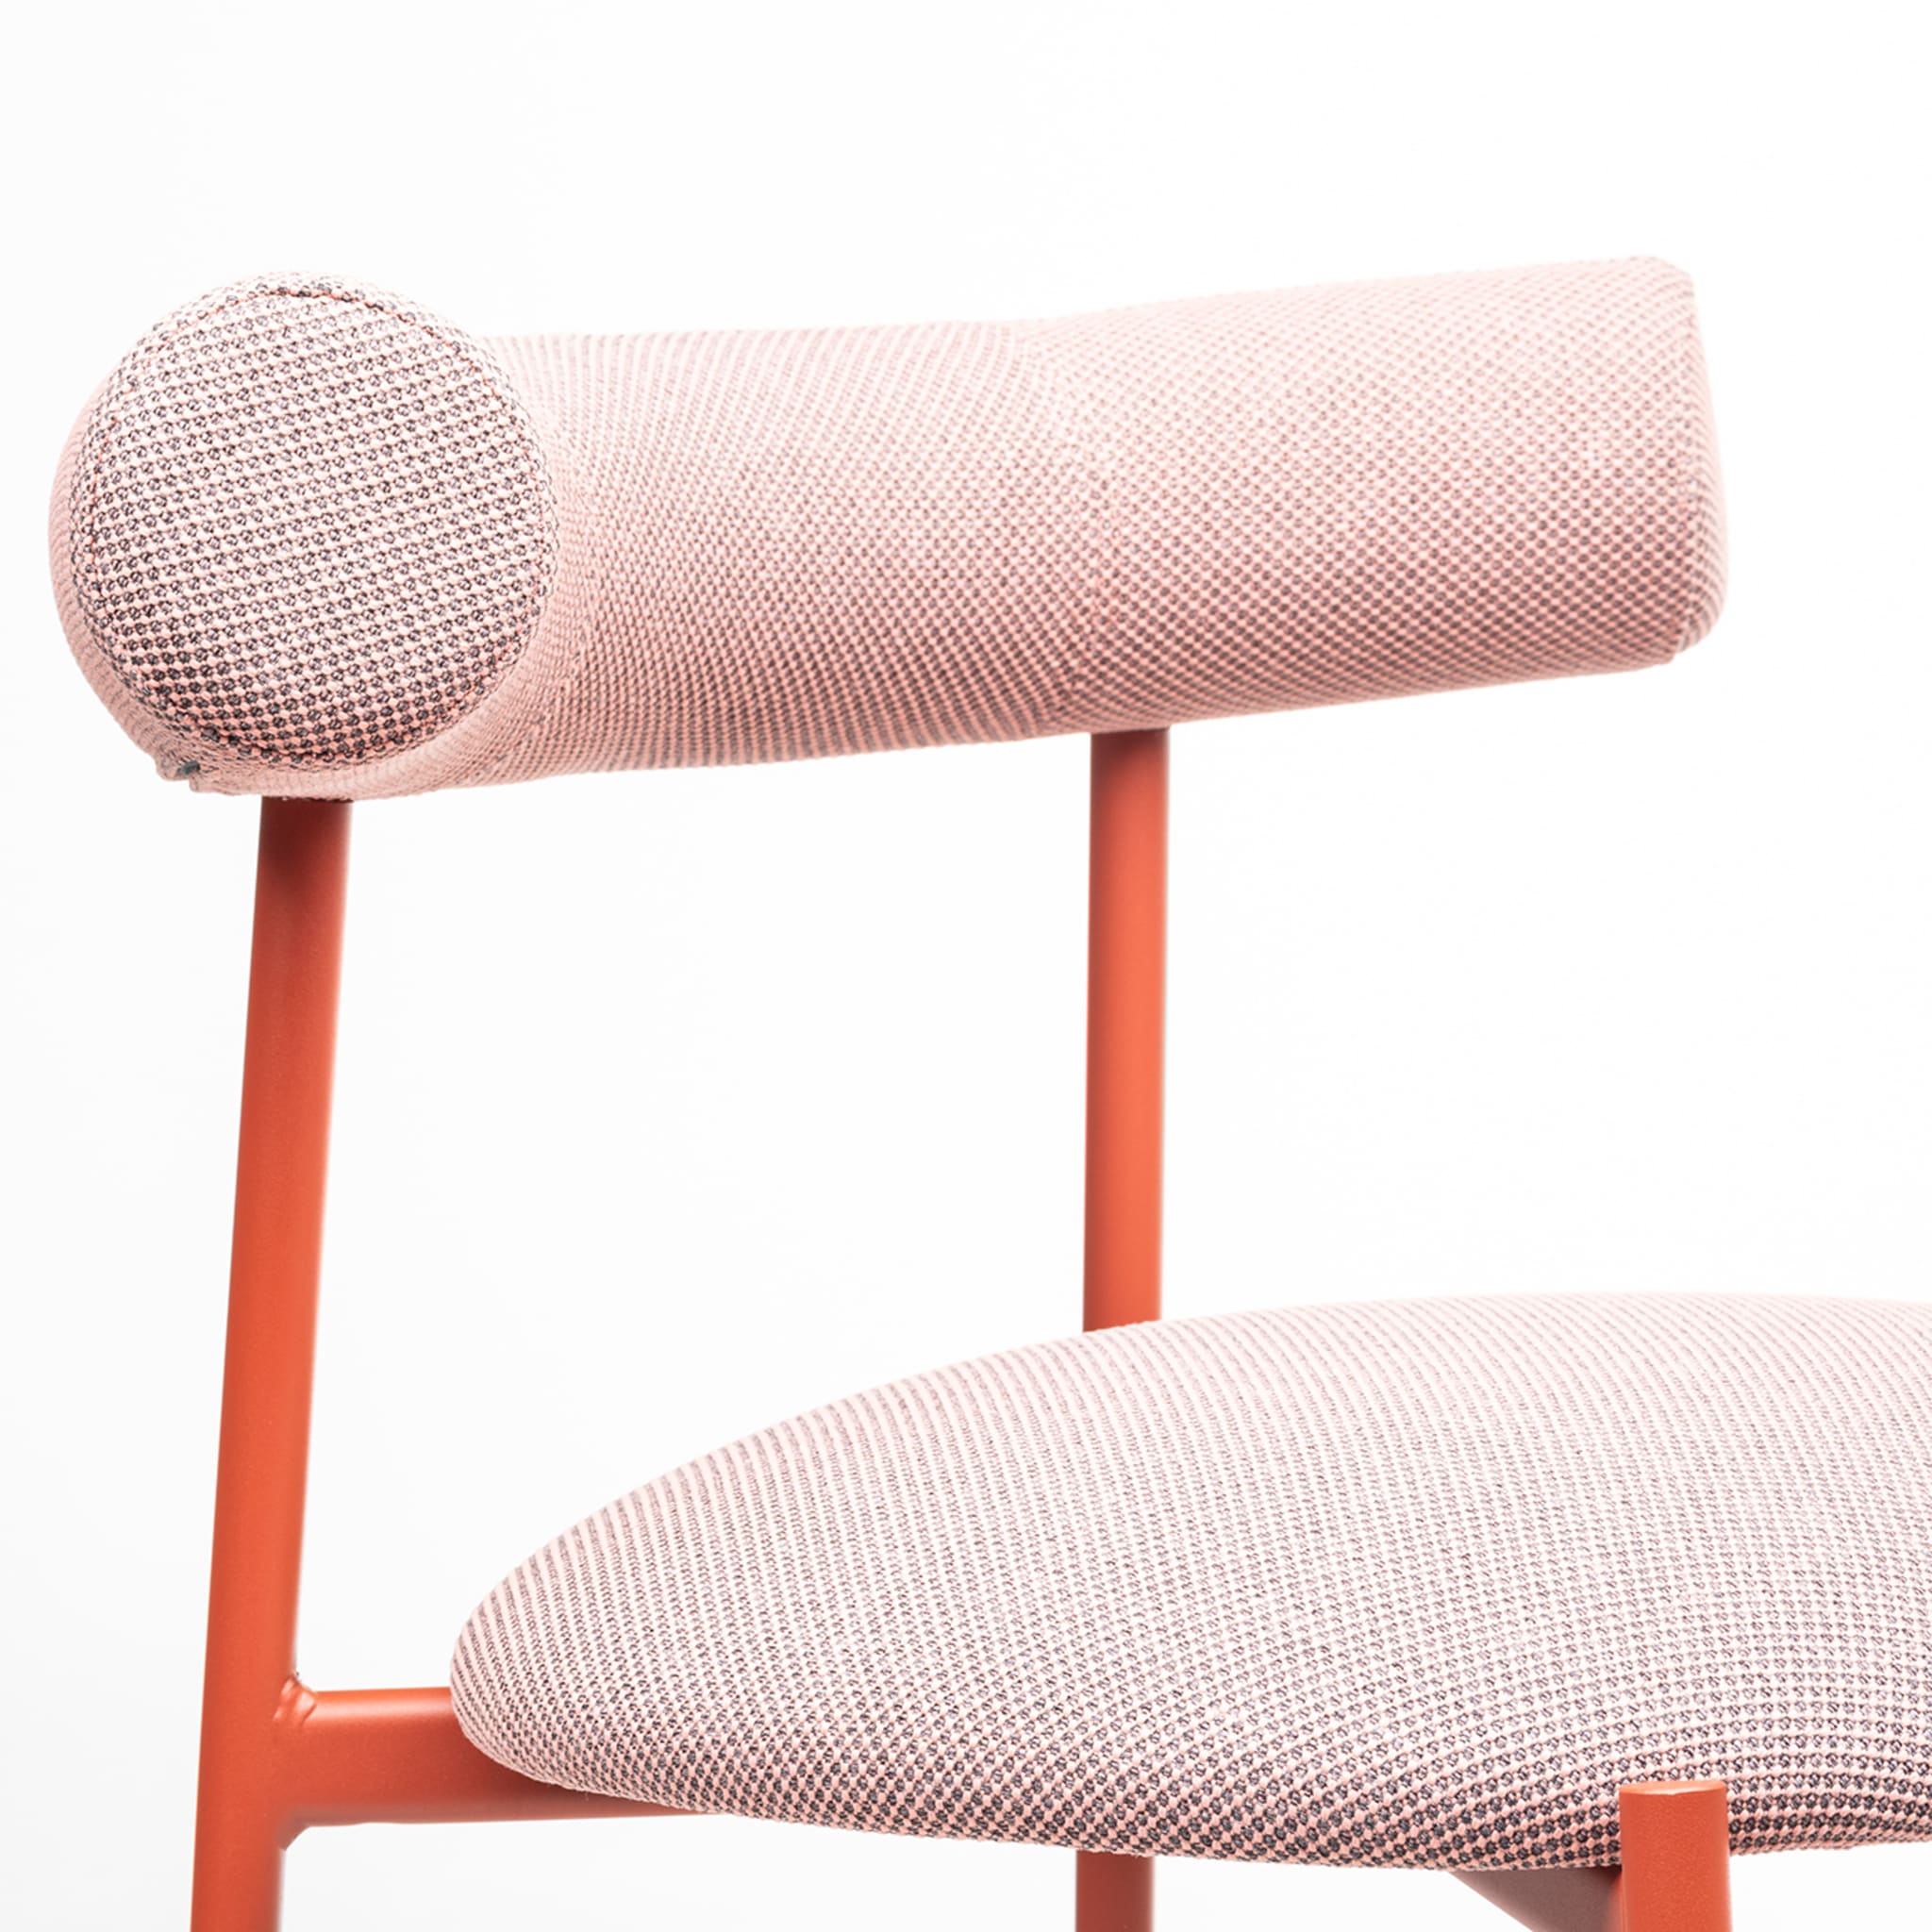 Pampa S Pink & Brick-Red Chair by Studio Pastina - Alternative view 2